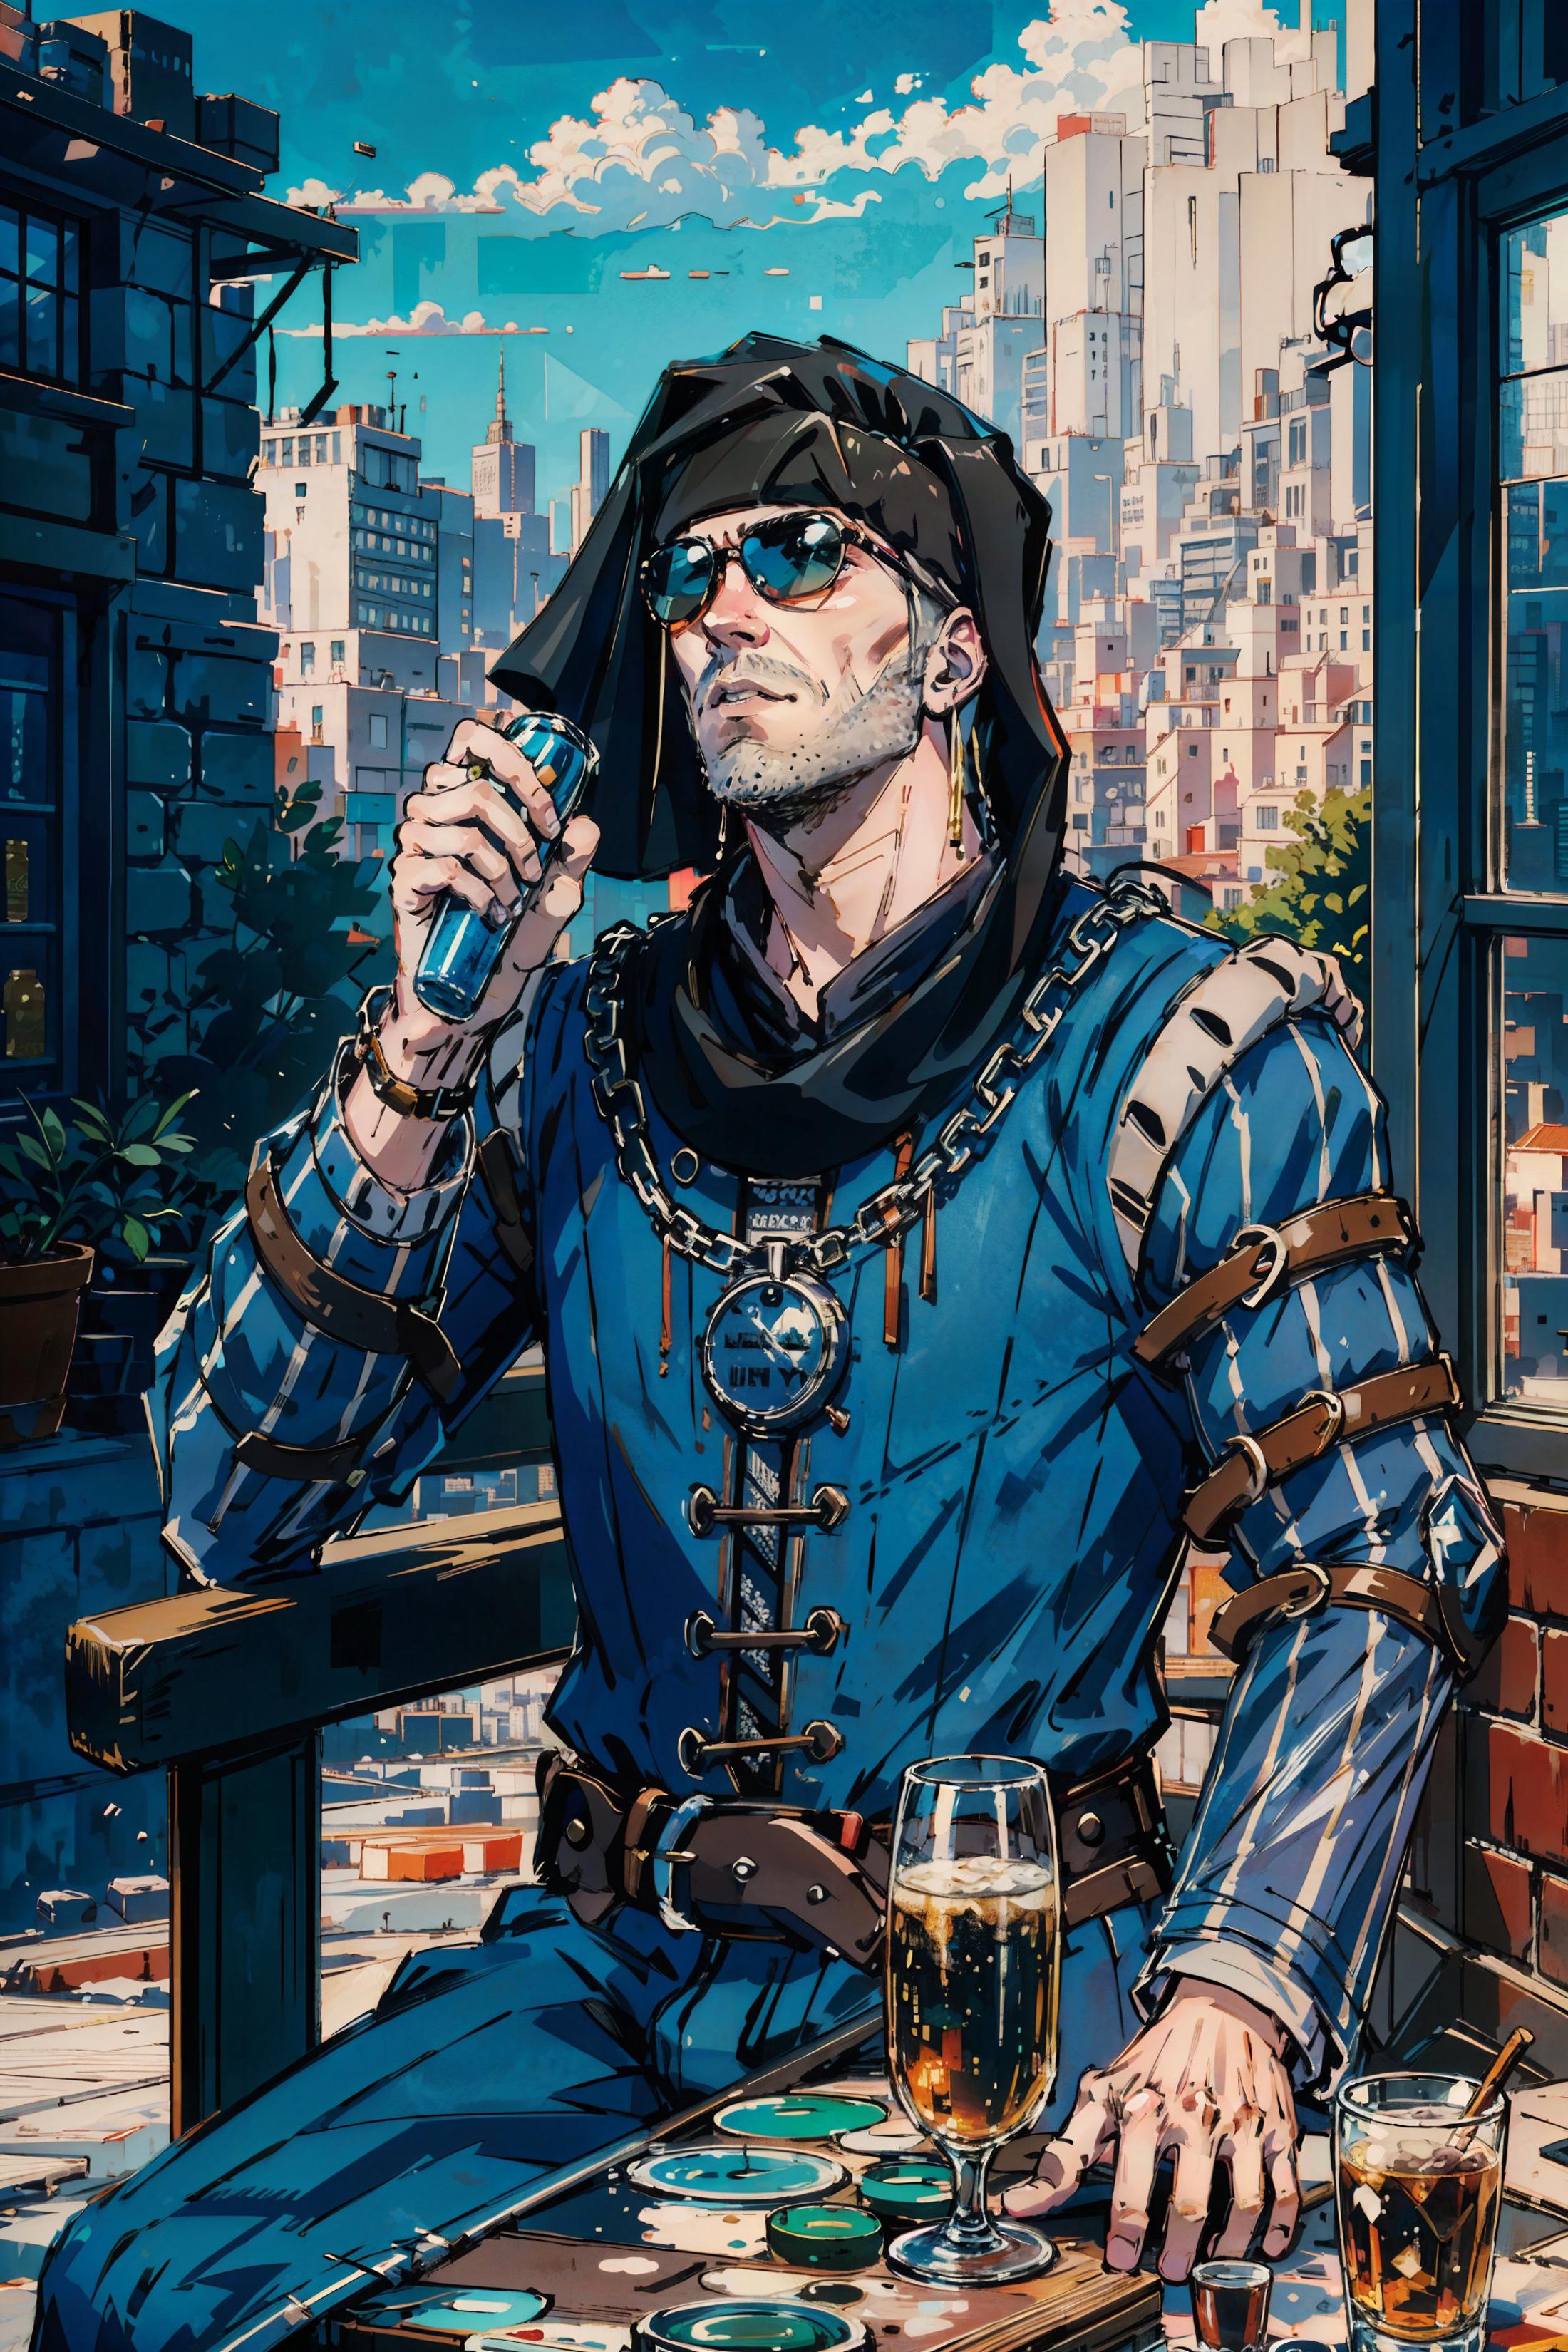 Vernon Roche | The Witcher 3 : Wild Hunt image by soul3142